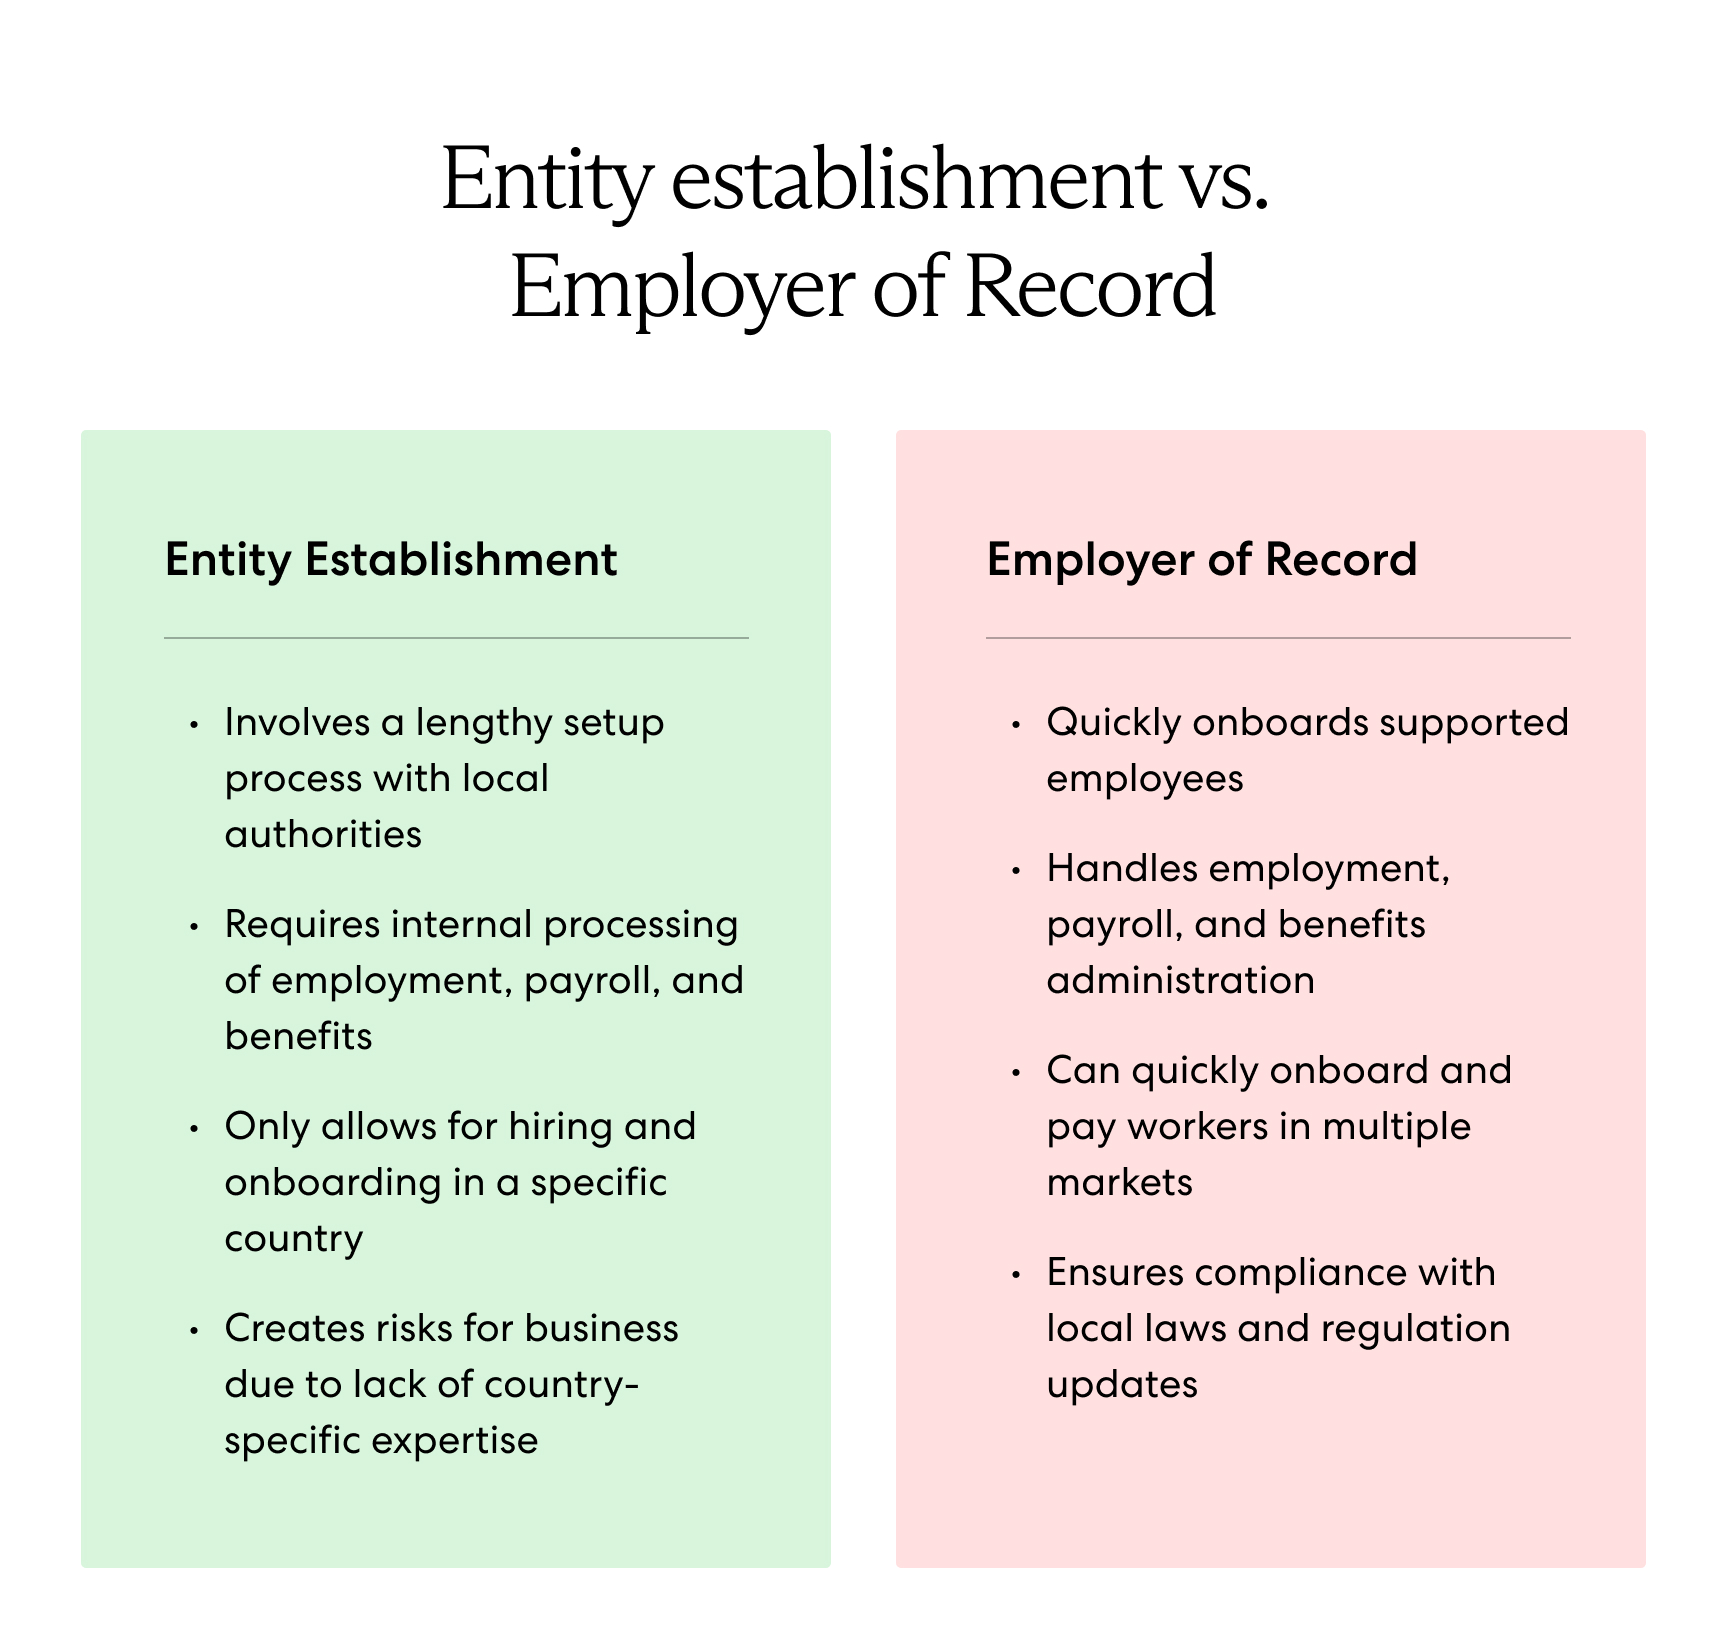 Key differences between entity establishment and partnering with an EOR